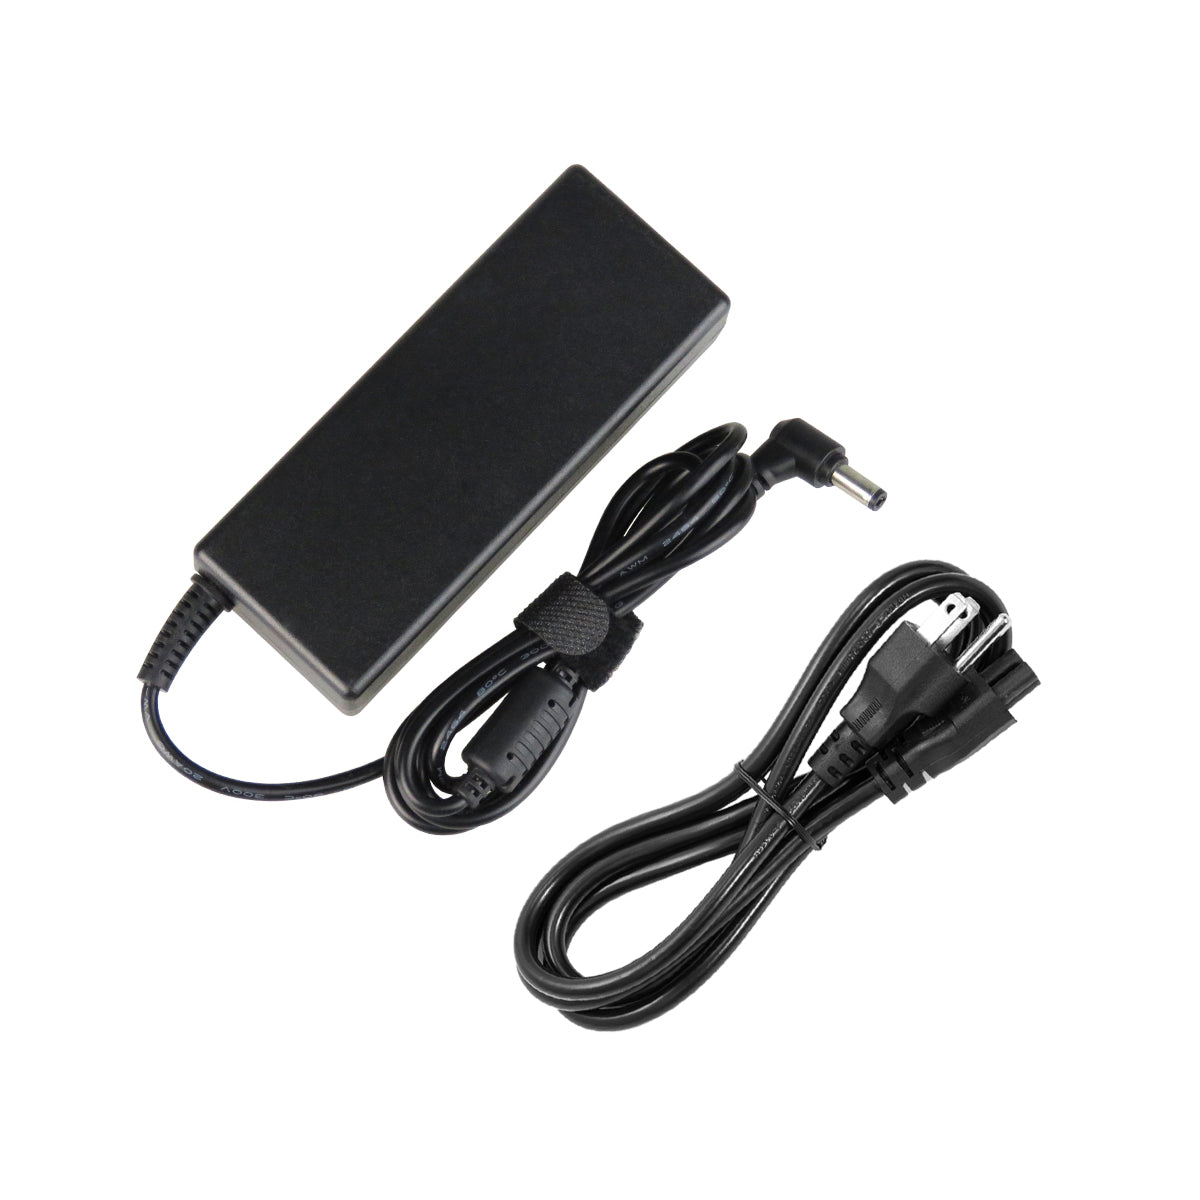 AC Adapter Charger for ASUS K56CA Laptop.